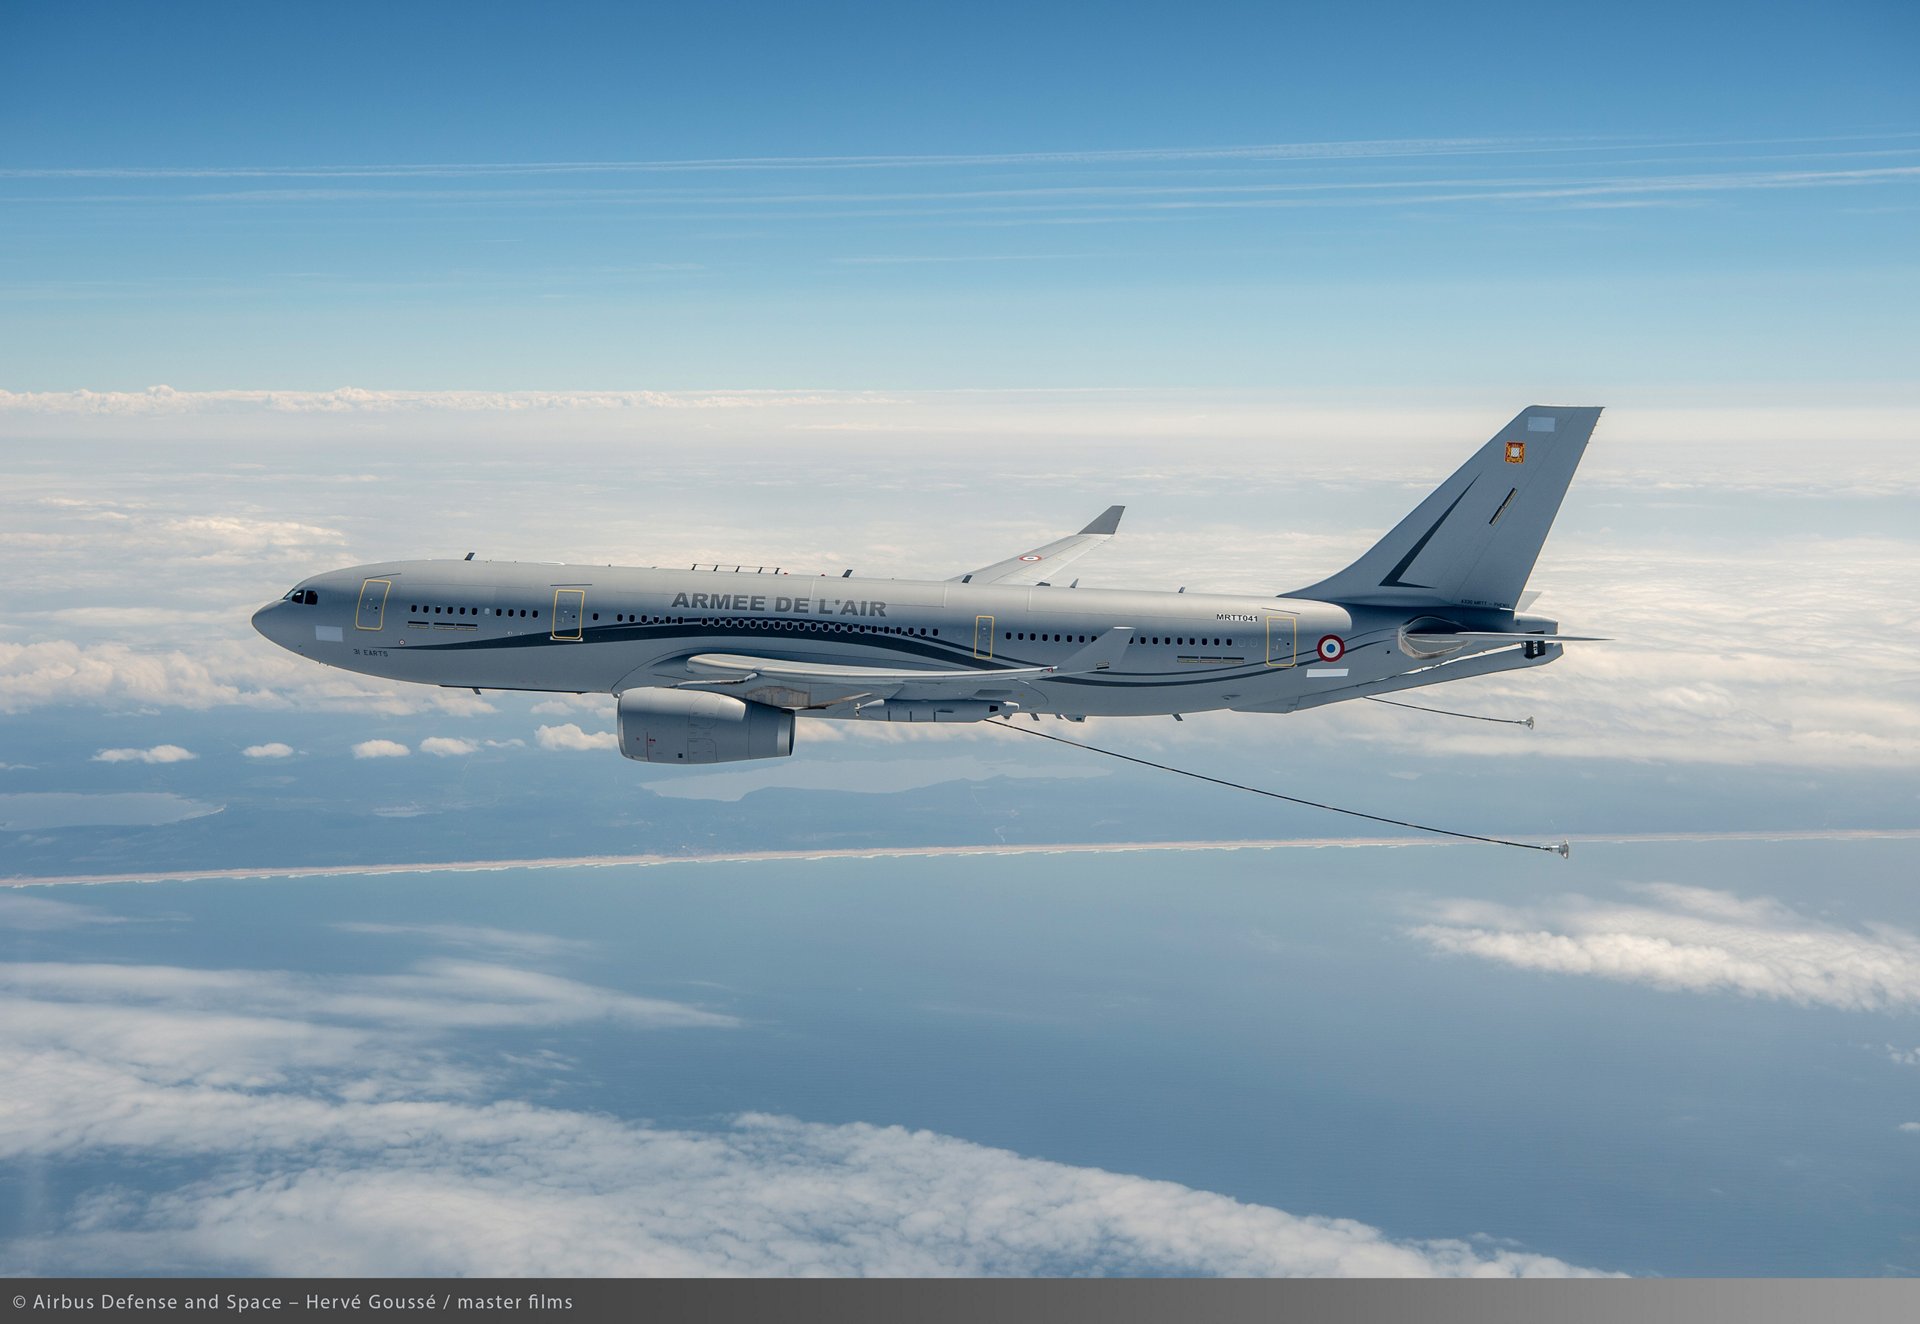 France orders three more Airbus A330 MRTT Multi-Role Tanker